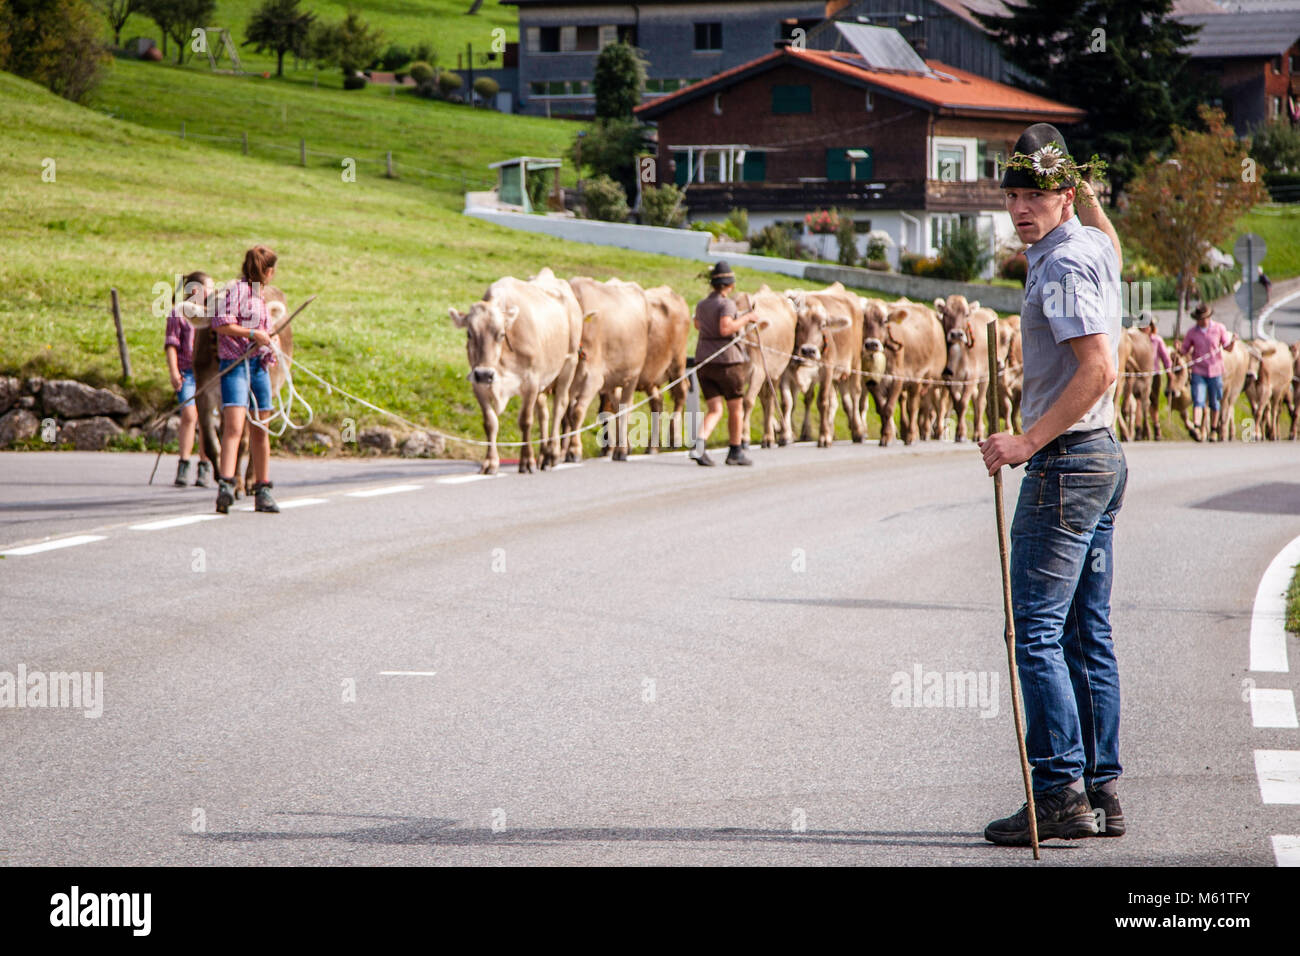 Ceremonial driving down of cattle from the mountain pastures into the valley in autumn, Hittisau, Austria Stock Photo